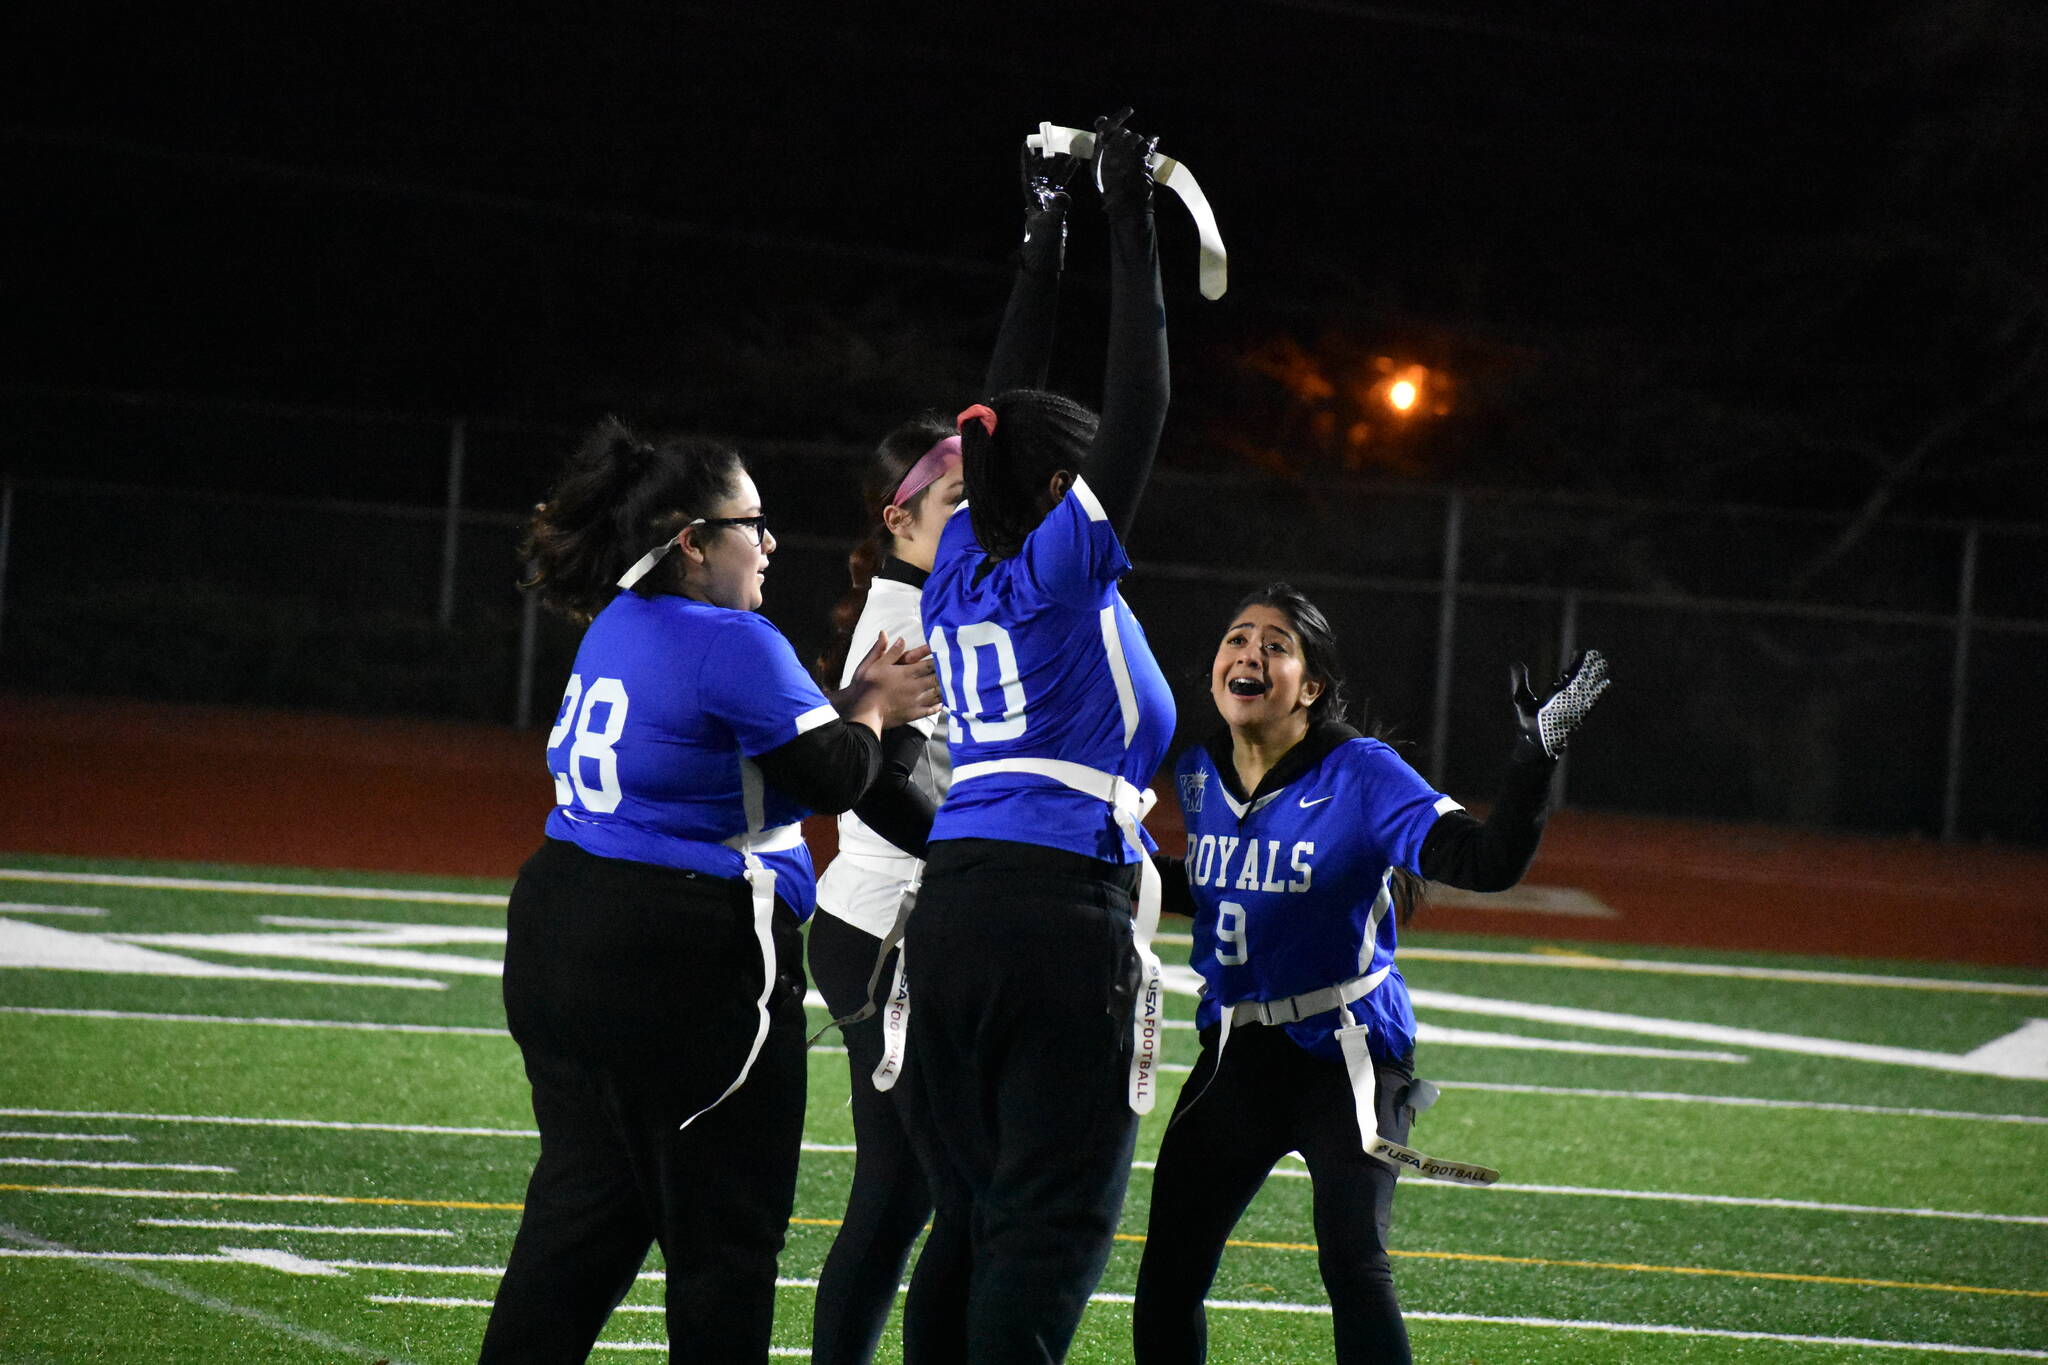 Photos by Ben Ray / The Reporter
Harnur Kaur (9) celebrates Tenjnq Kaba (10) after she pulled a flag.